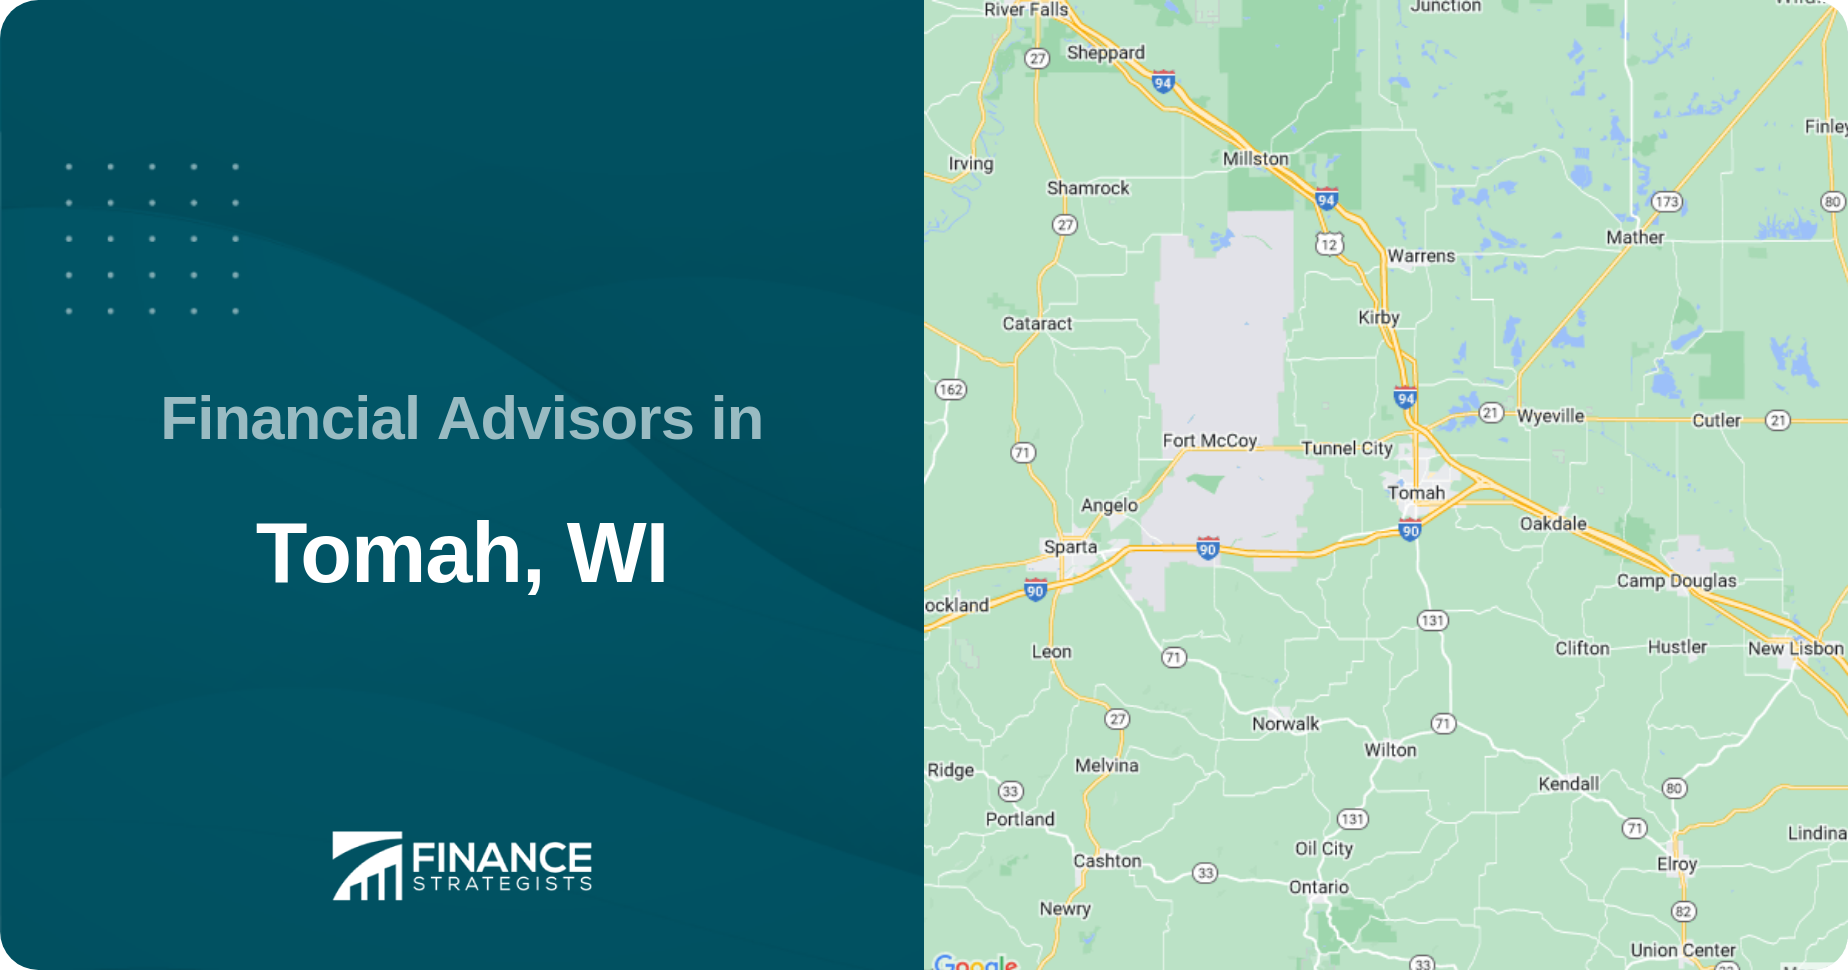 Financial Advisors in Tomah, WI